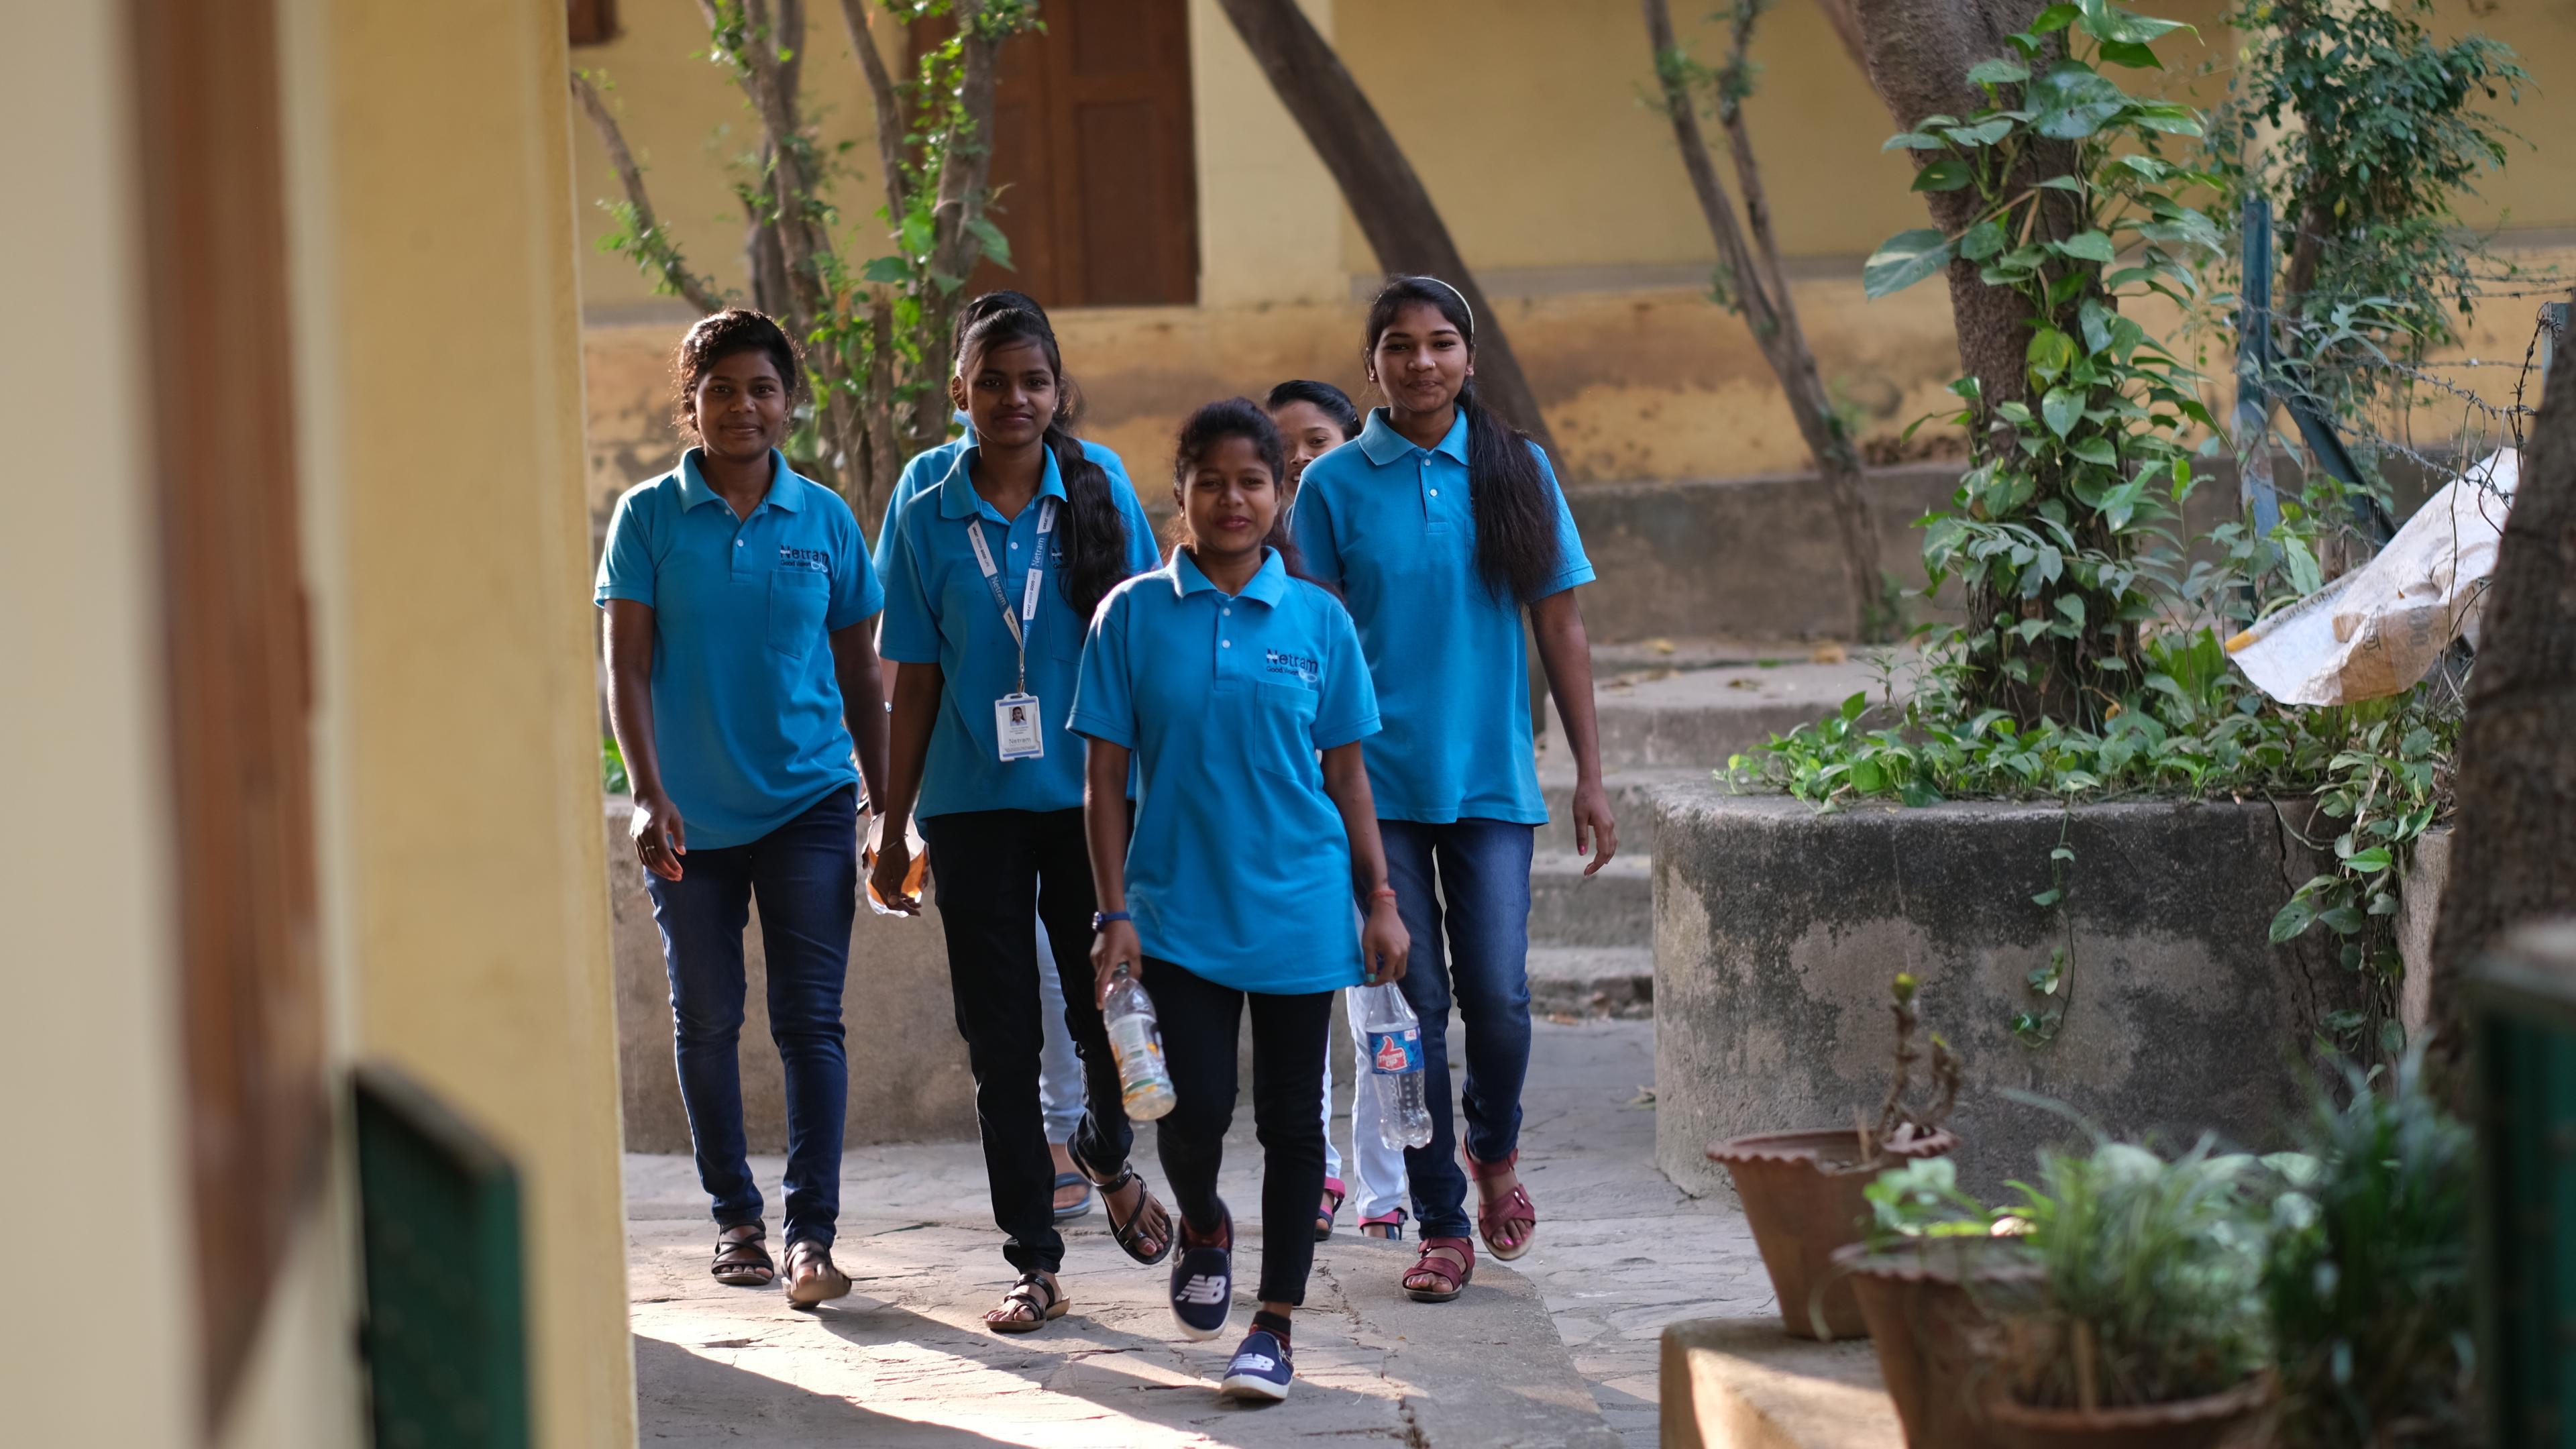 Walking young people in India